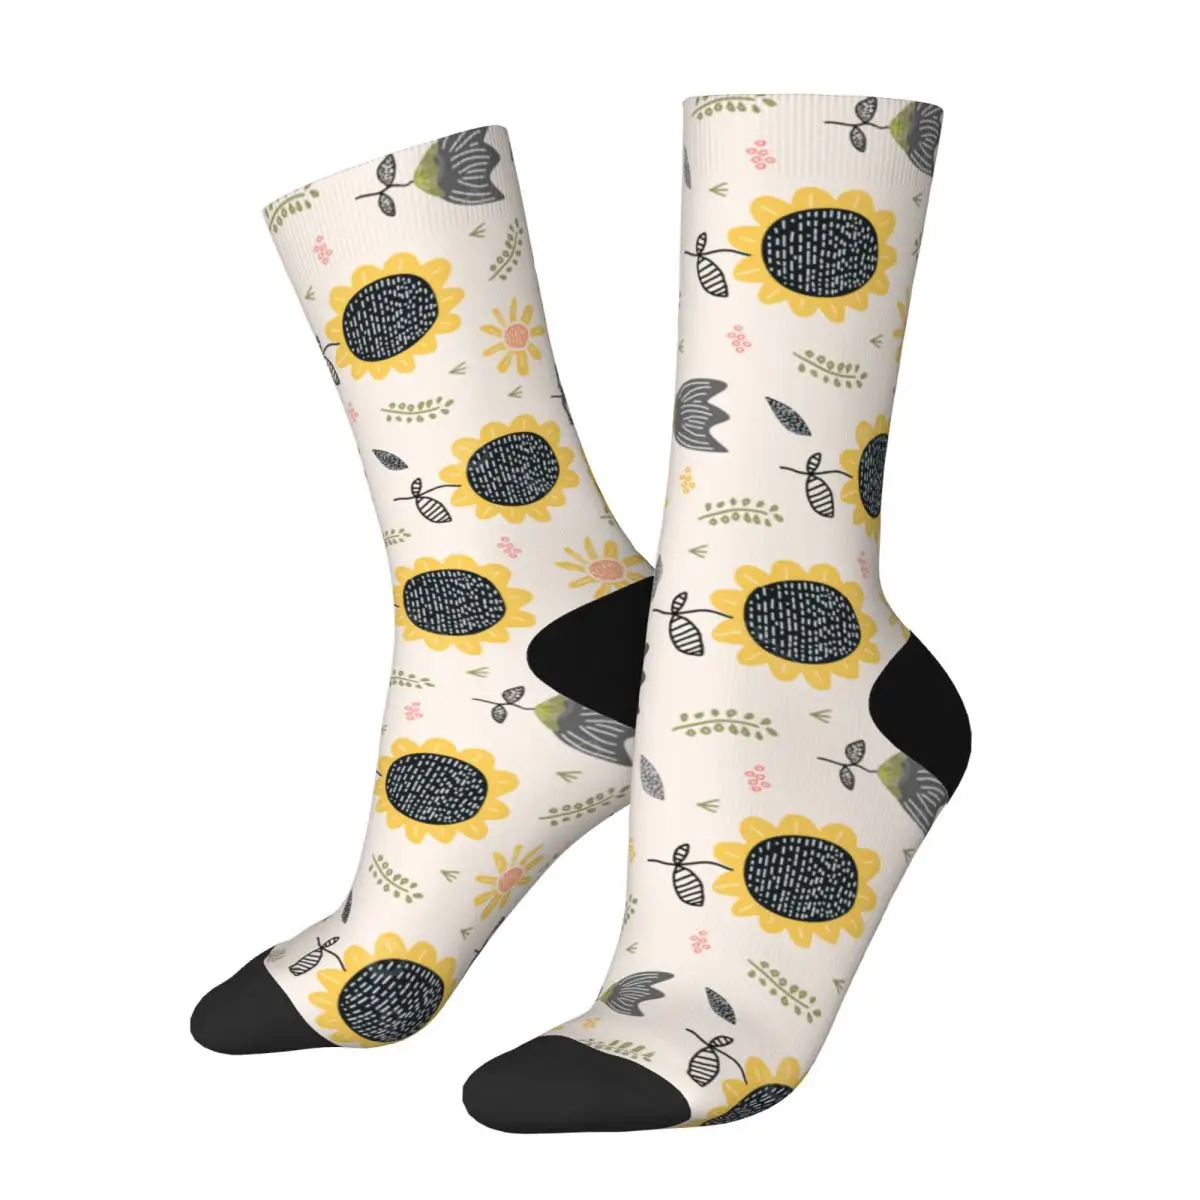 Sun Flower Pattern Drawn Floral Adult Socks Men's Compression Socks Unisex Band Harajuku Seamless Printed Funny Crew Sock corderona floral b6 bullet dotted journal 160gsm thick paper elastic band hardcover notebook